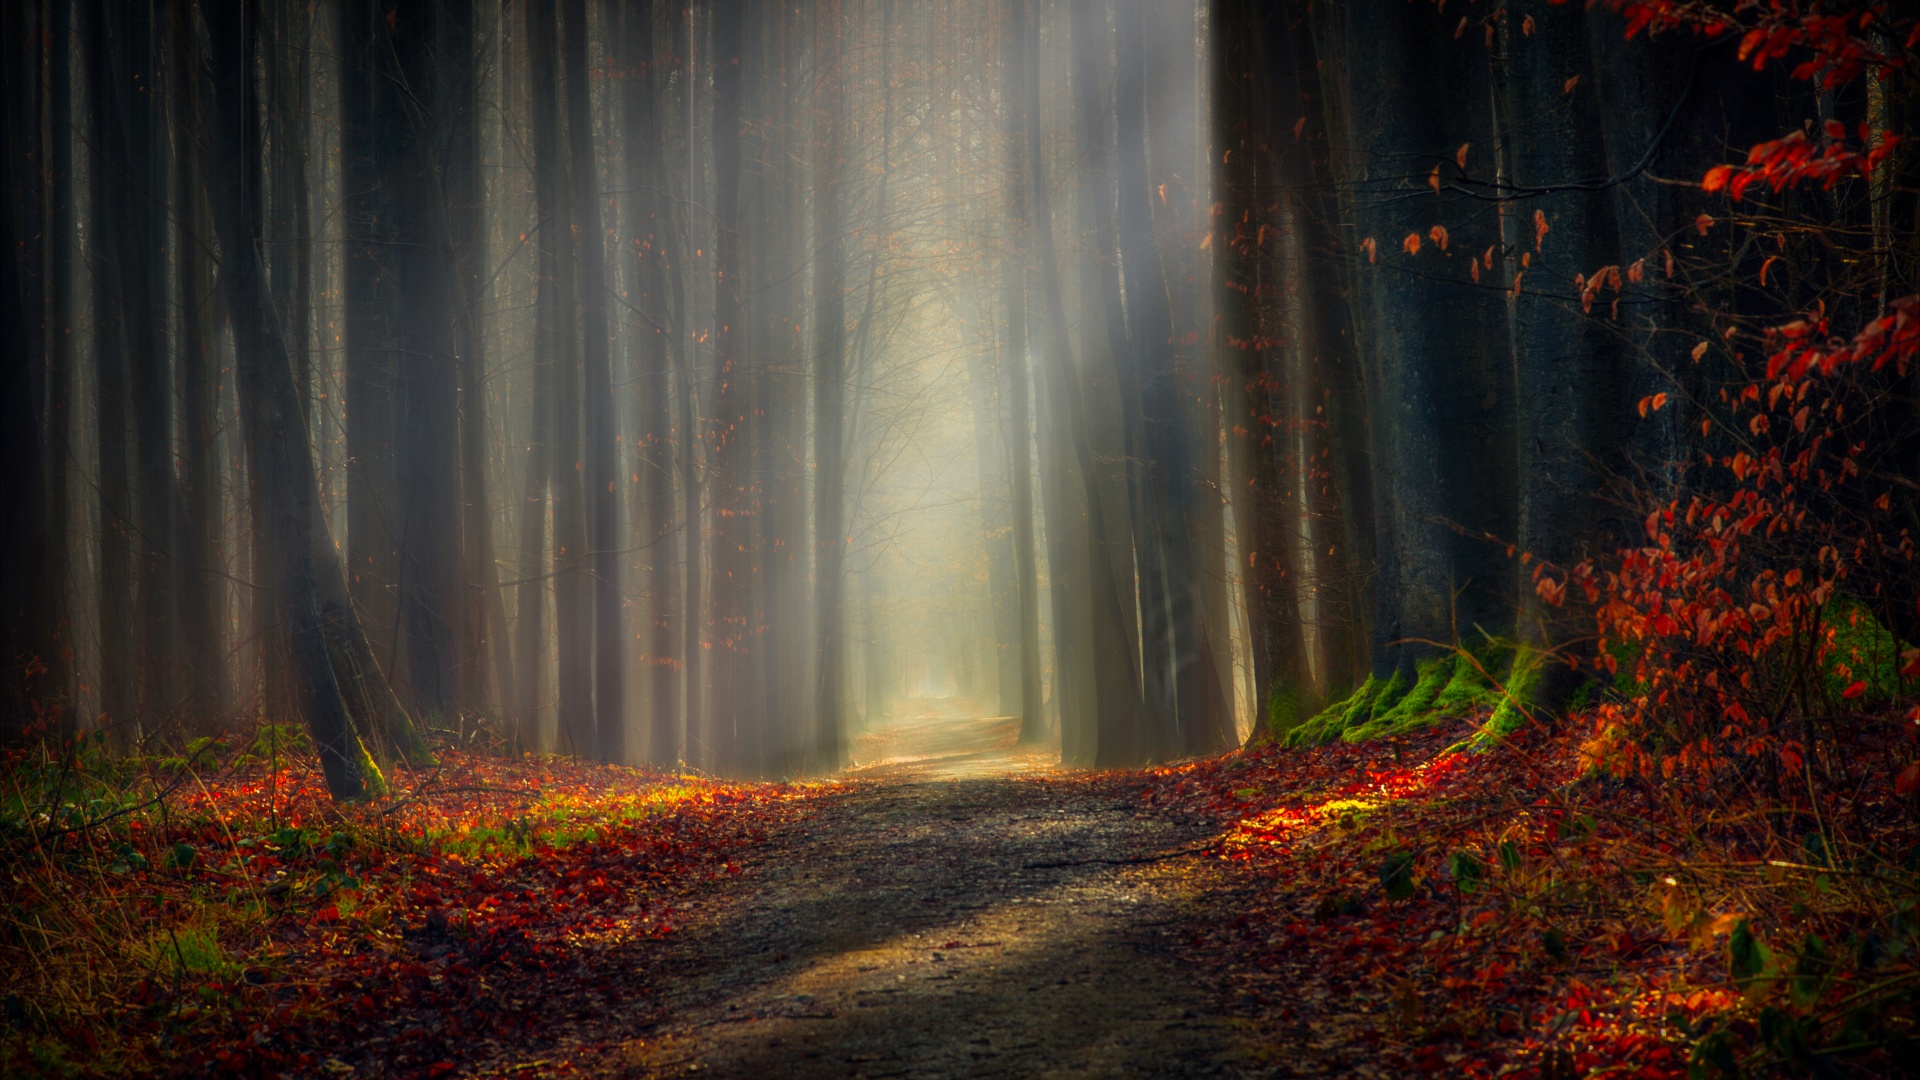 Forest Path Wallpaper 4k Autumn Leaves Dirt Road Pathway